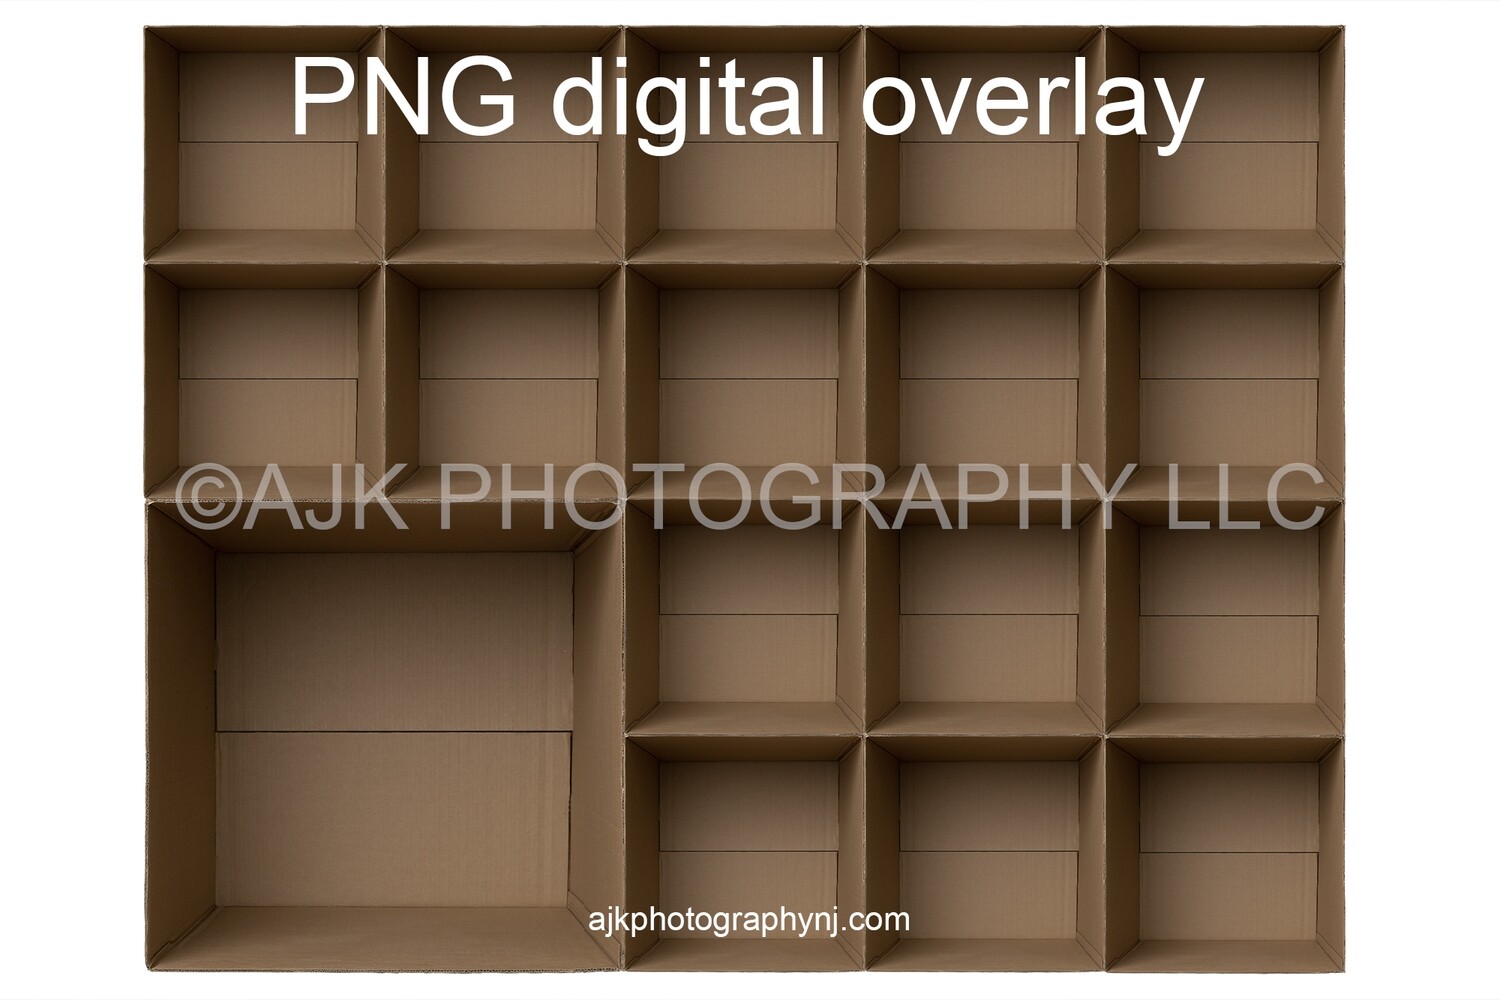 17 empty cardboard boxes template, class photo template, 1 teacher, 16 students, PNG Digital Overlay